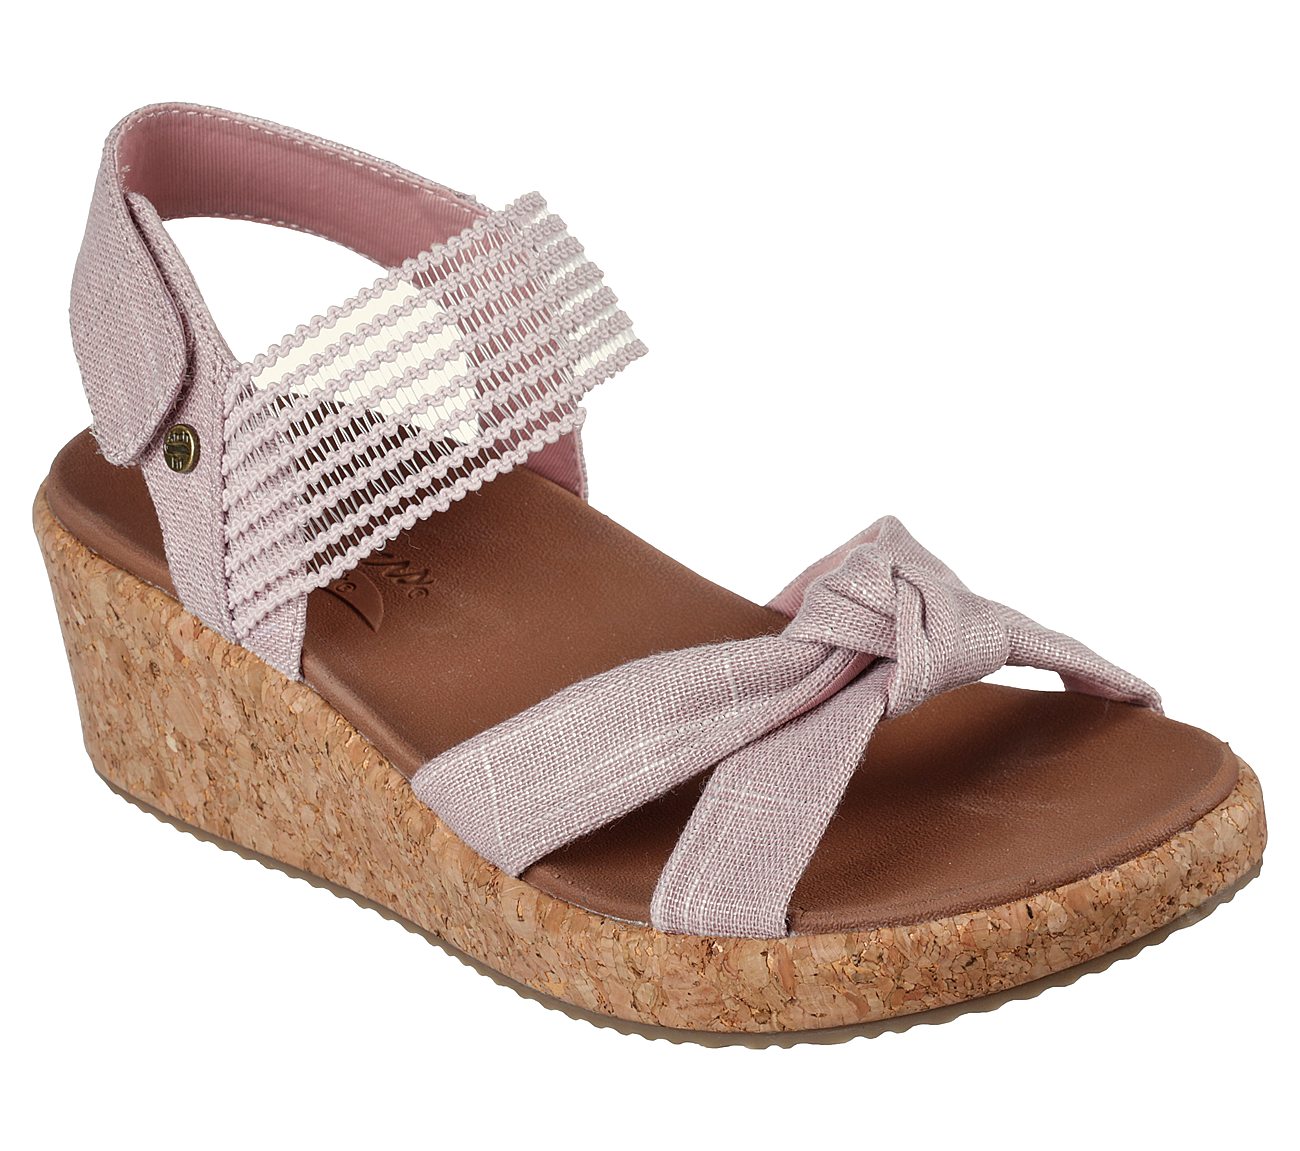 ARCH FIT BEVERLEE - JULIET, PPINK Footwear Lateral View